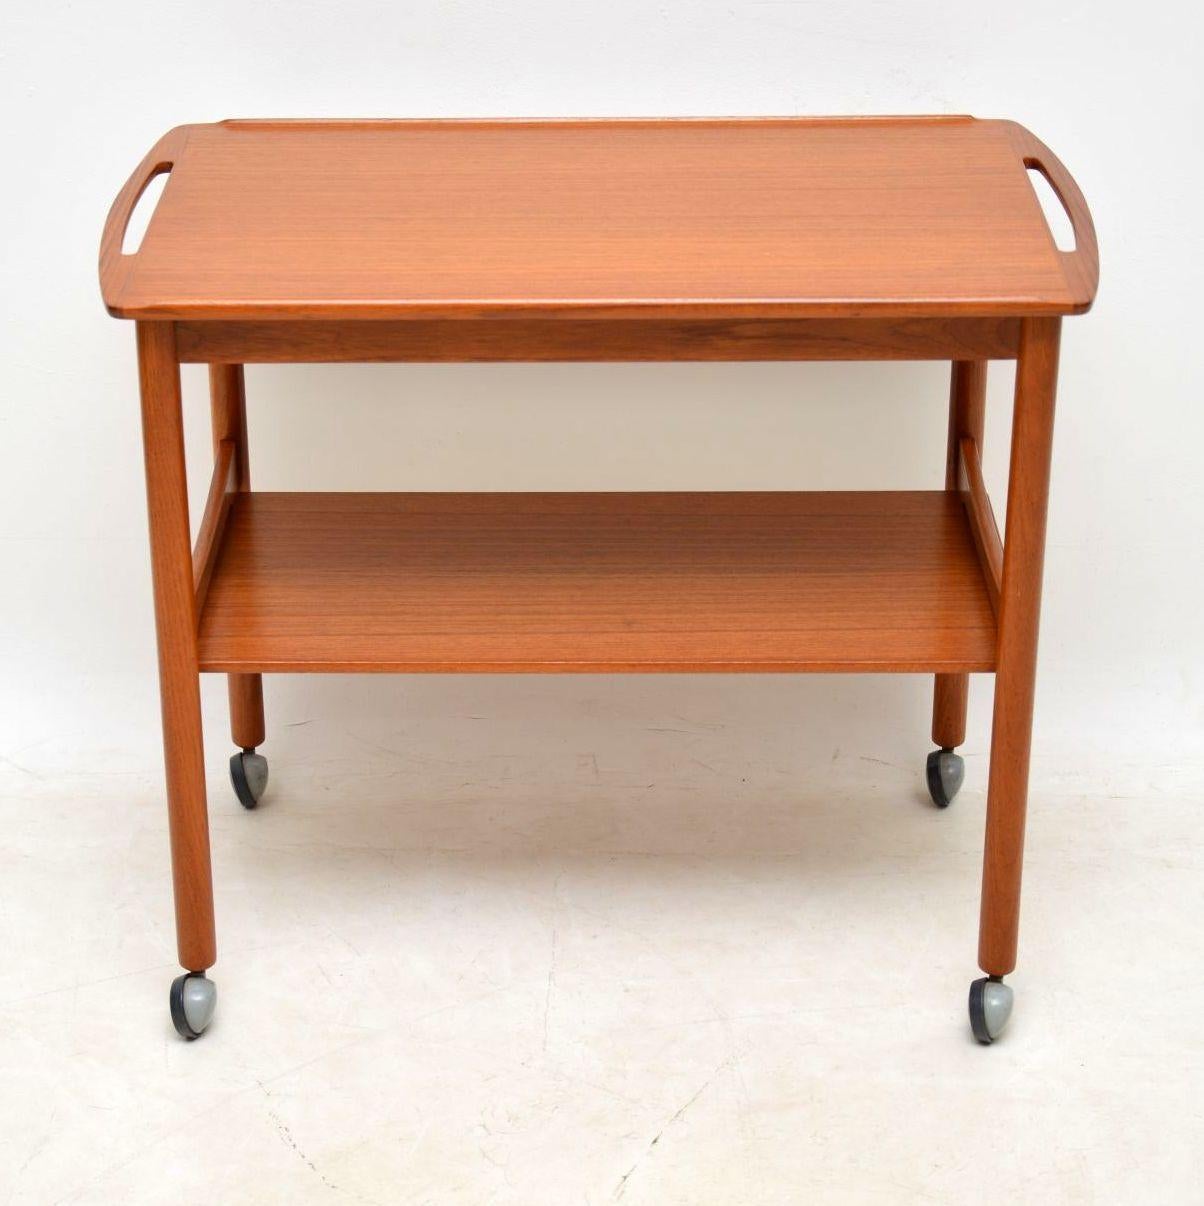 A smart, stylish and useful vintage Danish drinks trolley in teak, this dates from the 1960’s. It’s beautifully styled and is in superb condition for its age; we have just had this completely stripped and re-polished to a very high